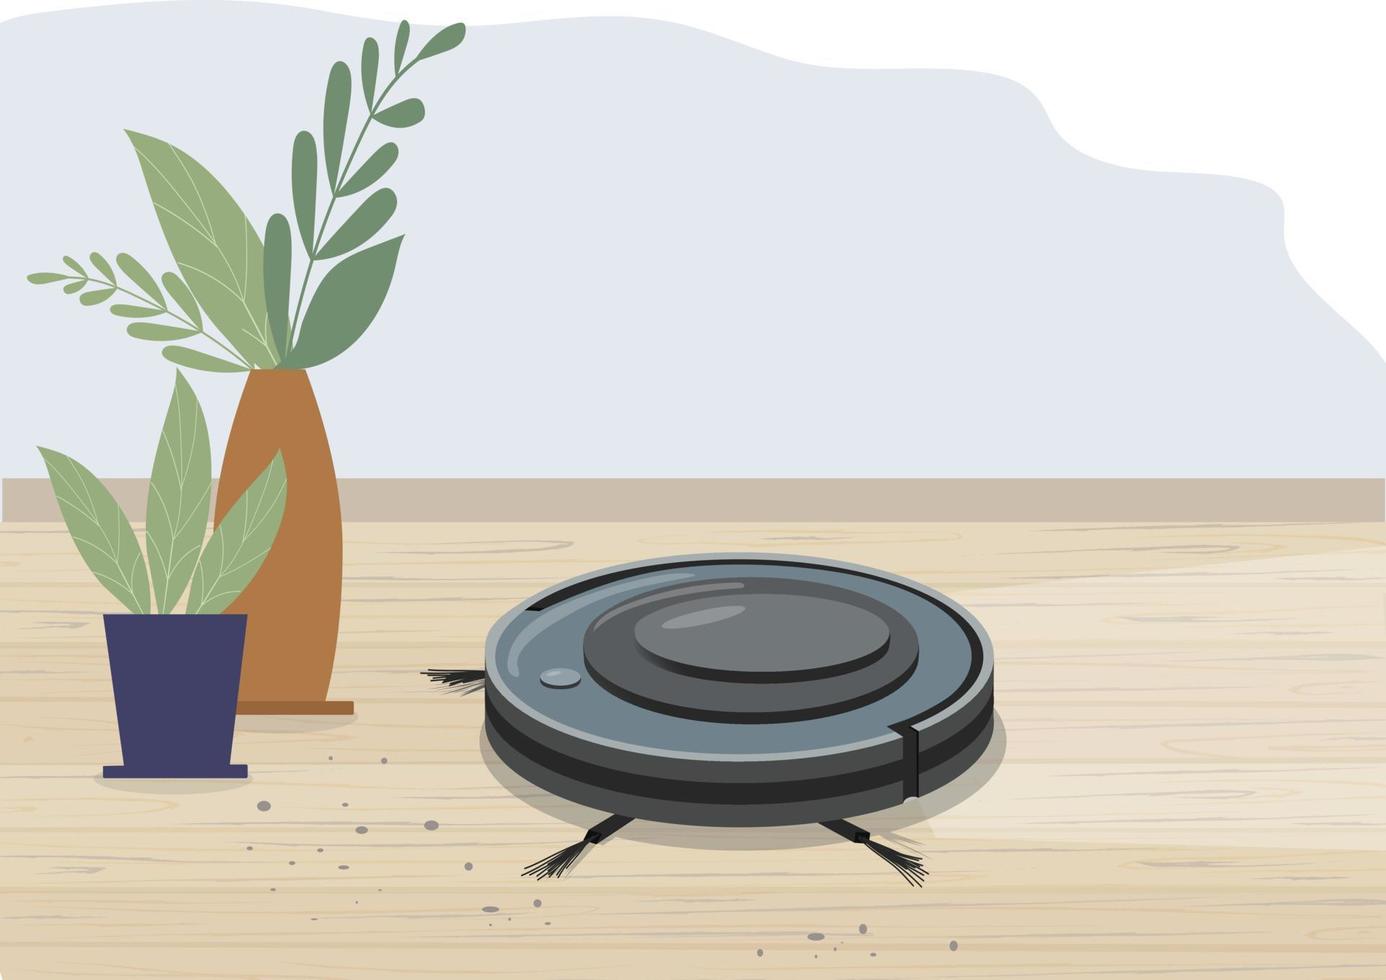 Smart robot vacuum cleaner in a modern living room. Wooden flooring, laminate flooring and potted plants. Modern smart home appliances for cleaning apartment vector